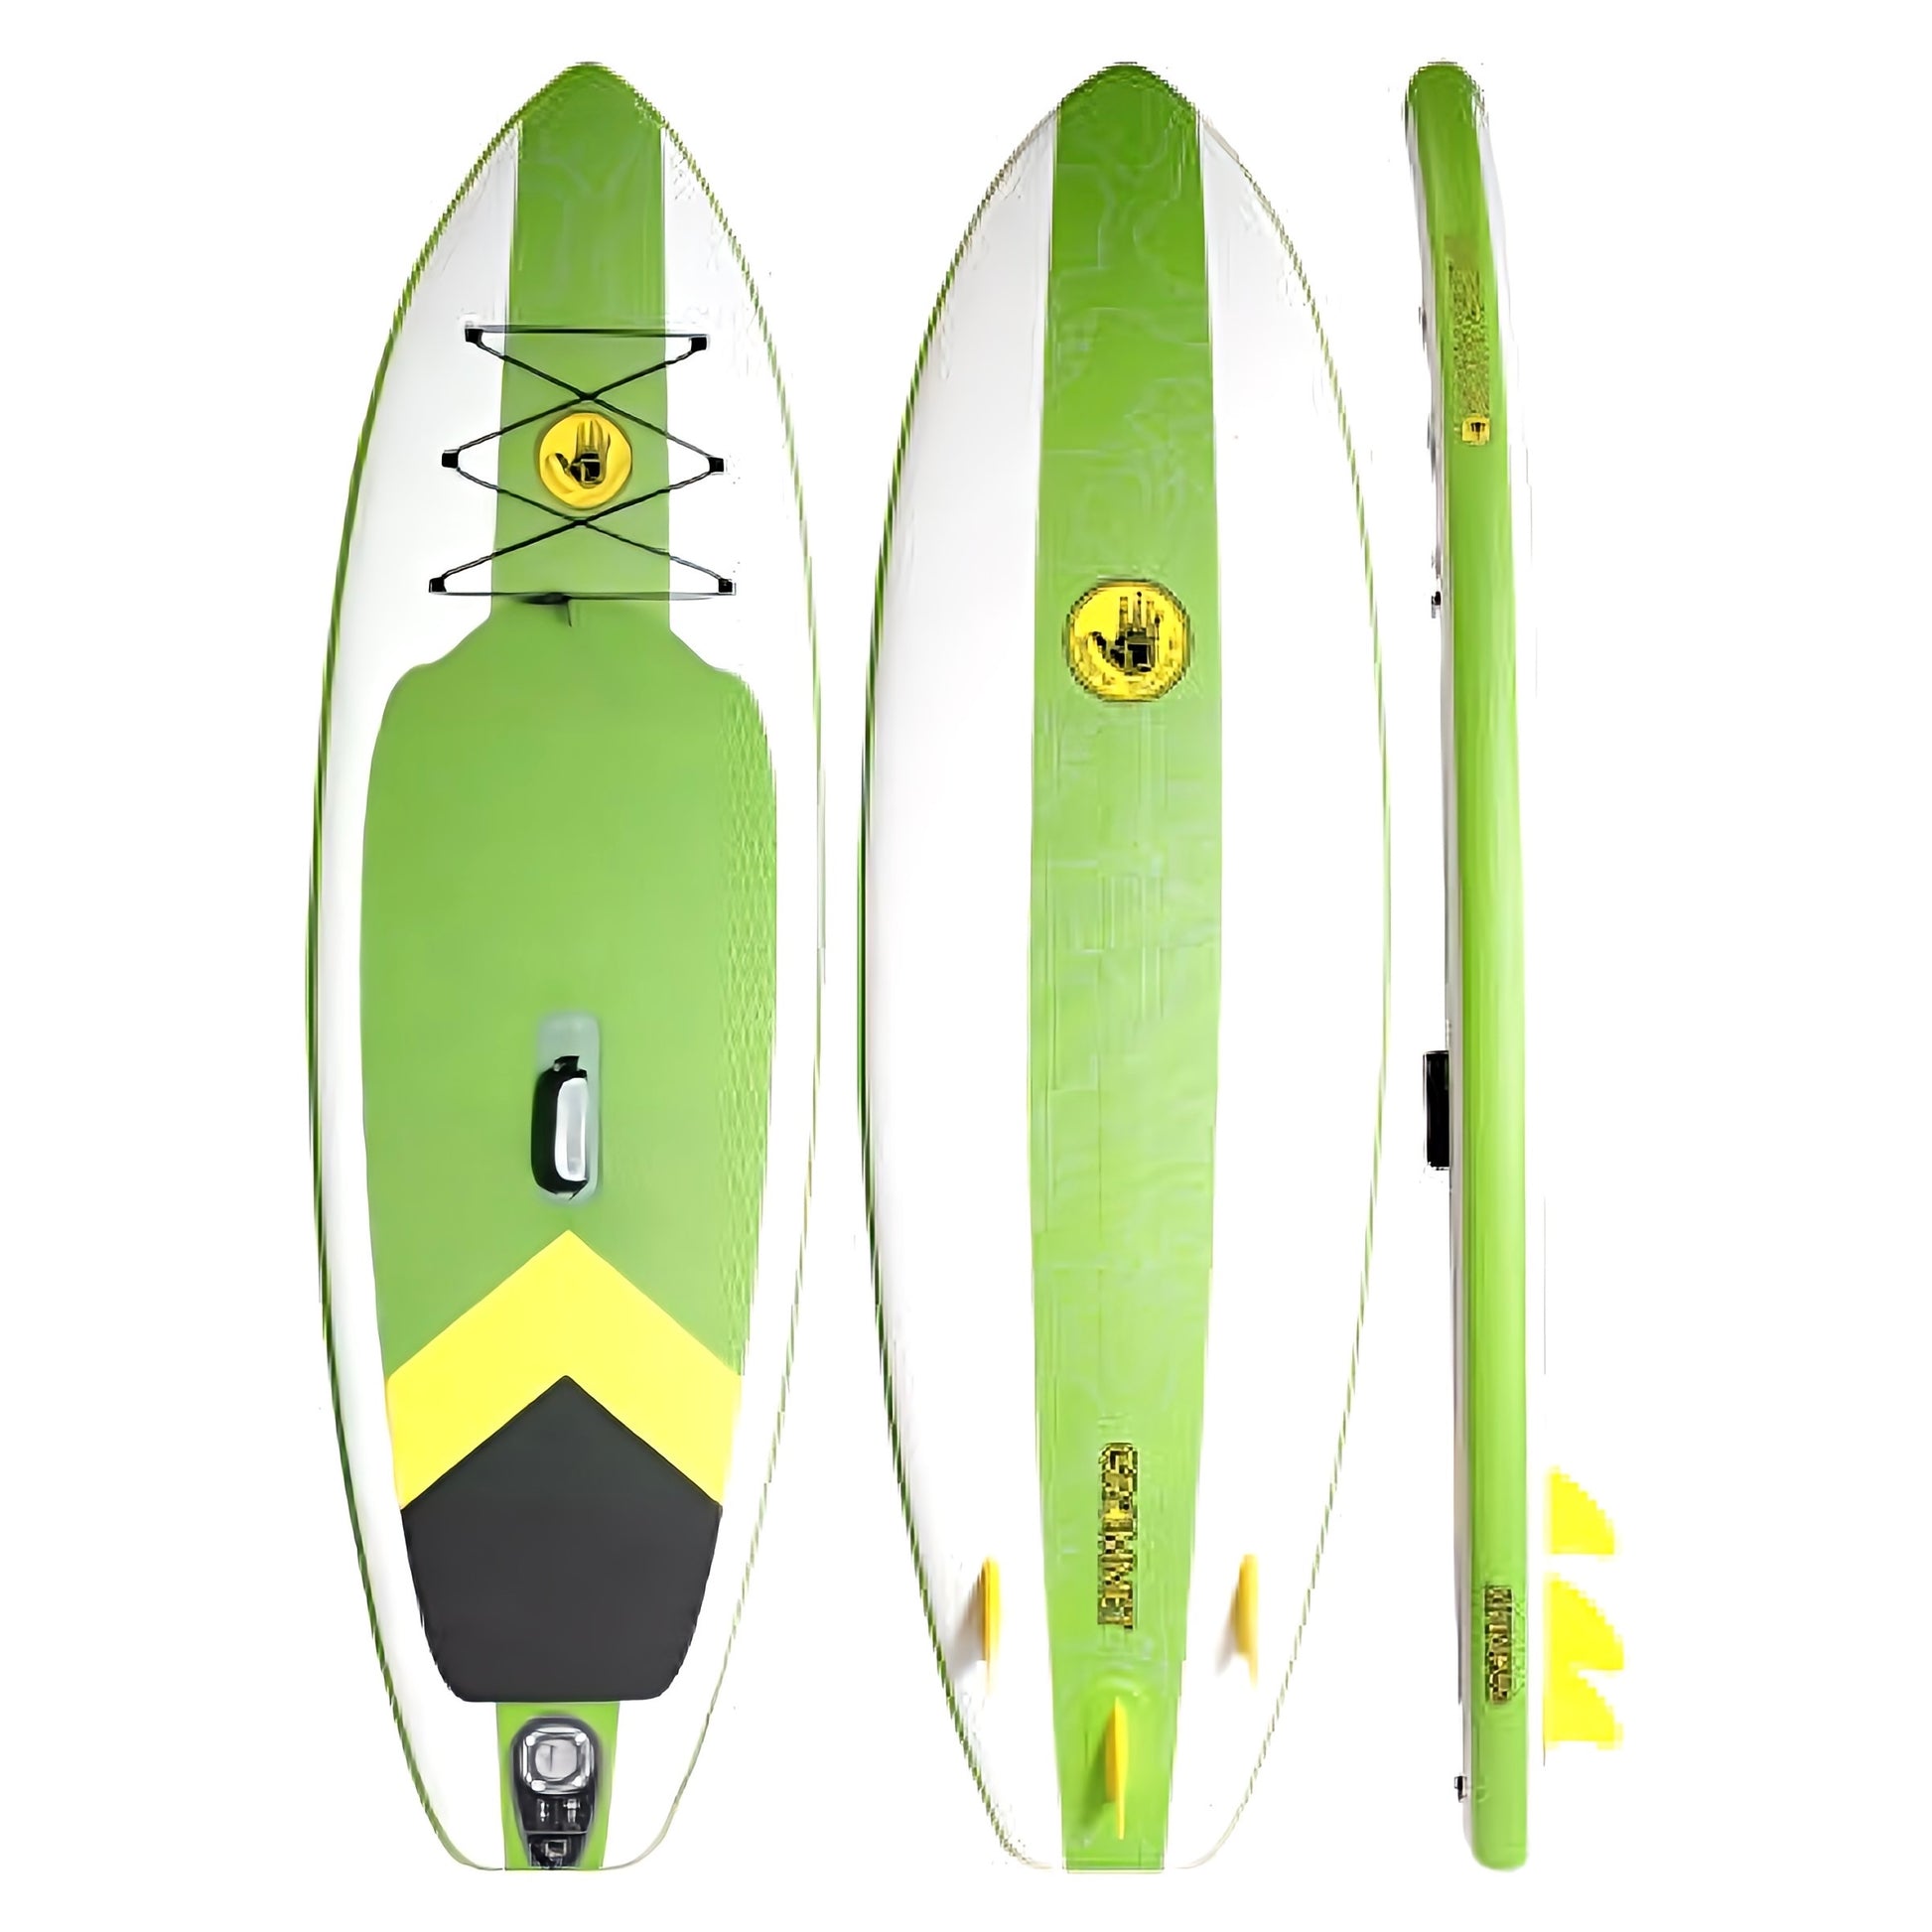 Body Glove Inflatable Stand Up Paddle Board SUP Surf Board, For Sale 8’ With All accessories